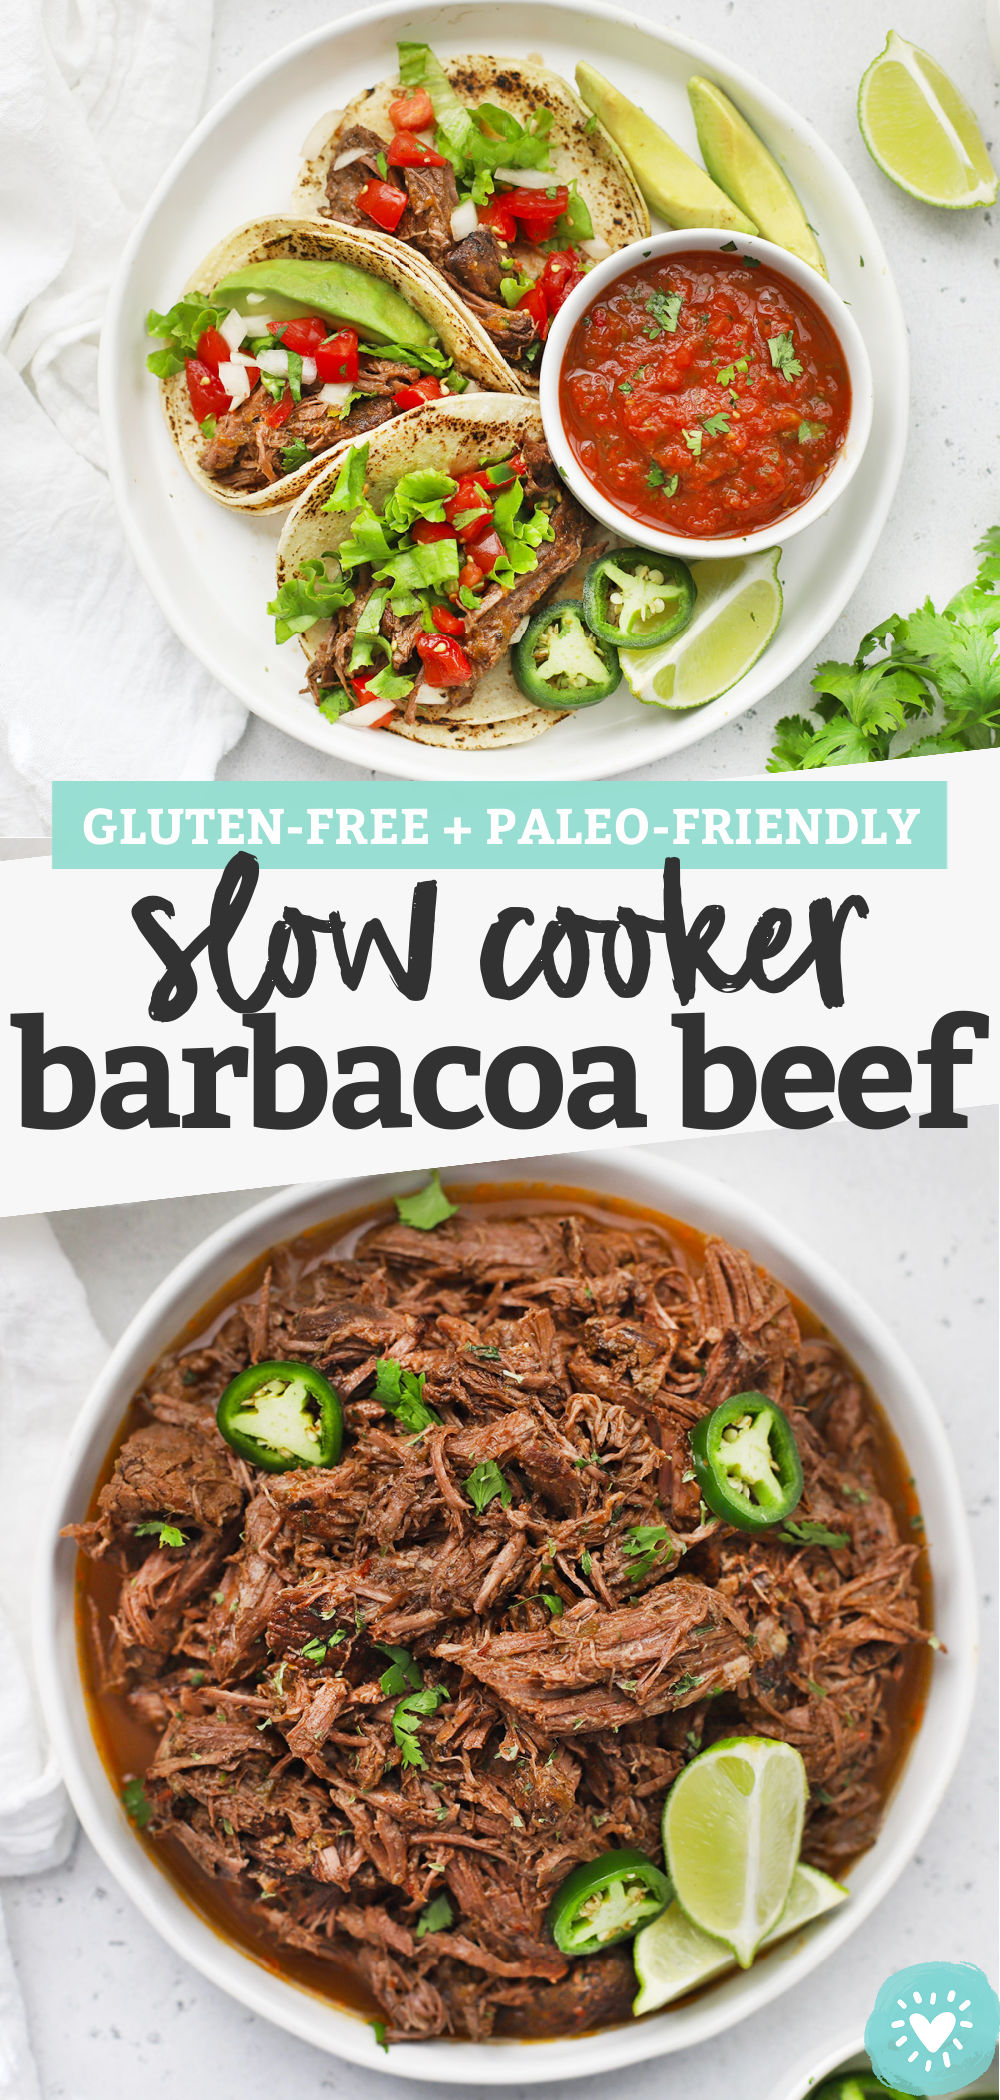 Slow Cooker Barbacoa Beef - Tender slow-cooker barbacoa beef makes the most amazing tacos, burritos, burrito bowls, nachos, and more! (Gluten-Free) // Barbacoa Beef Tacos // Crock pot barbacoa beef // Barbacoa beef burrito bowls // Paleo barbacoa beef #glutenfree #tacos #burritobowls #texmex #slowcooker #crockpot